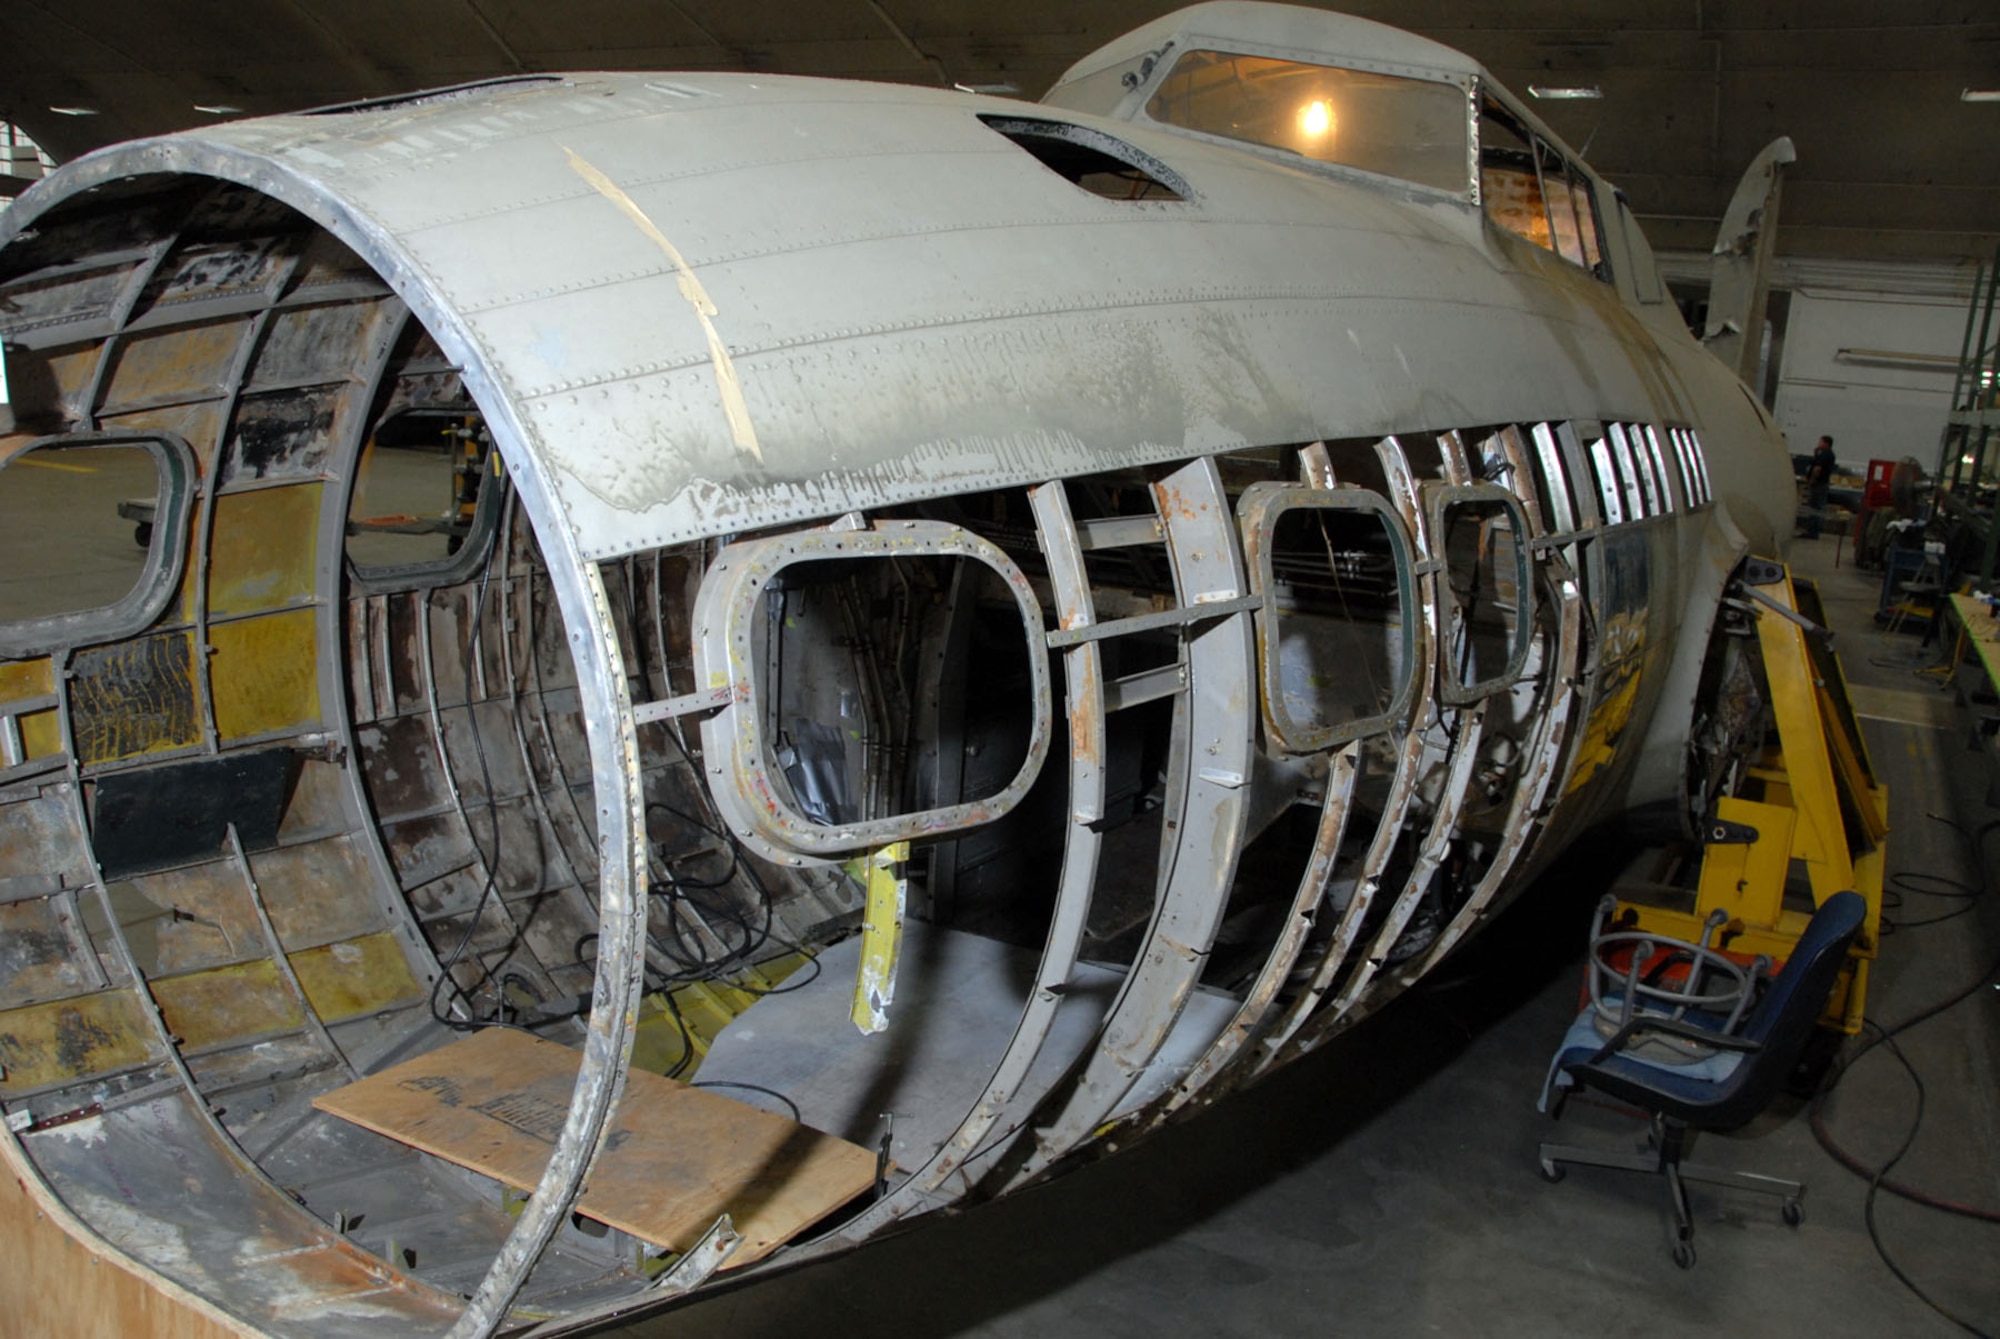 DAYTON, Ohio (6/2/2009) - B-17D The Swoose in the restoration hangar at the National Museum of the U.S. Air Force. (U.S. Air Force photo)